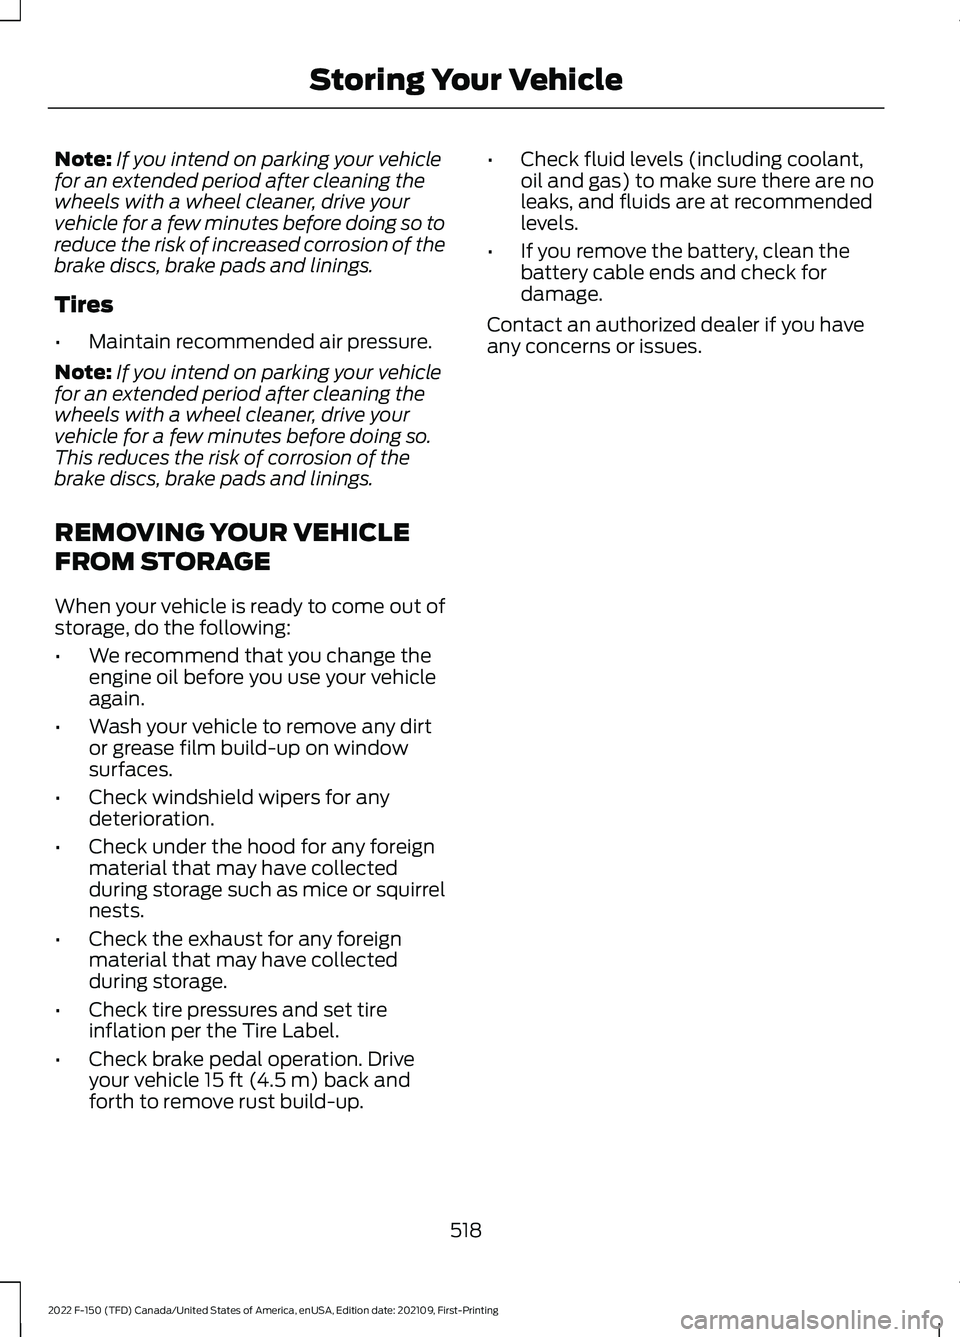 FORD F-150 2022 Service Manual Note:
If you intend on parking your vehicle
for an extended period after cleaning the
wheels with a wheel cleaner, drive your
vehicle for a few minutes before doing so to
reduce the risk of increased 